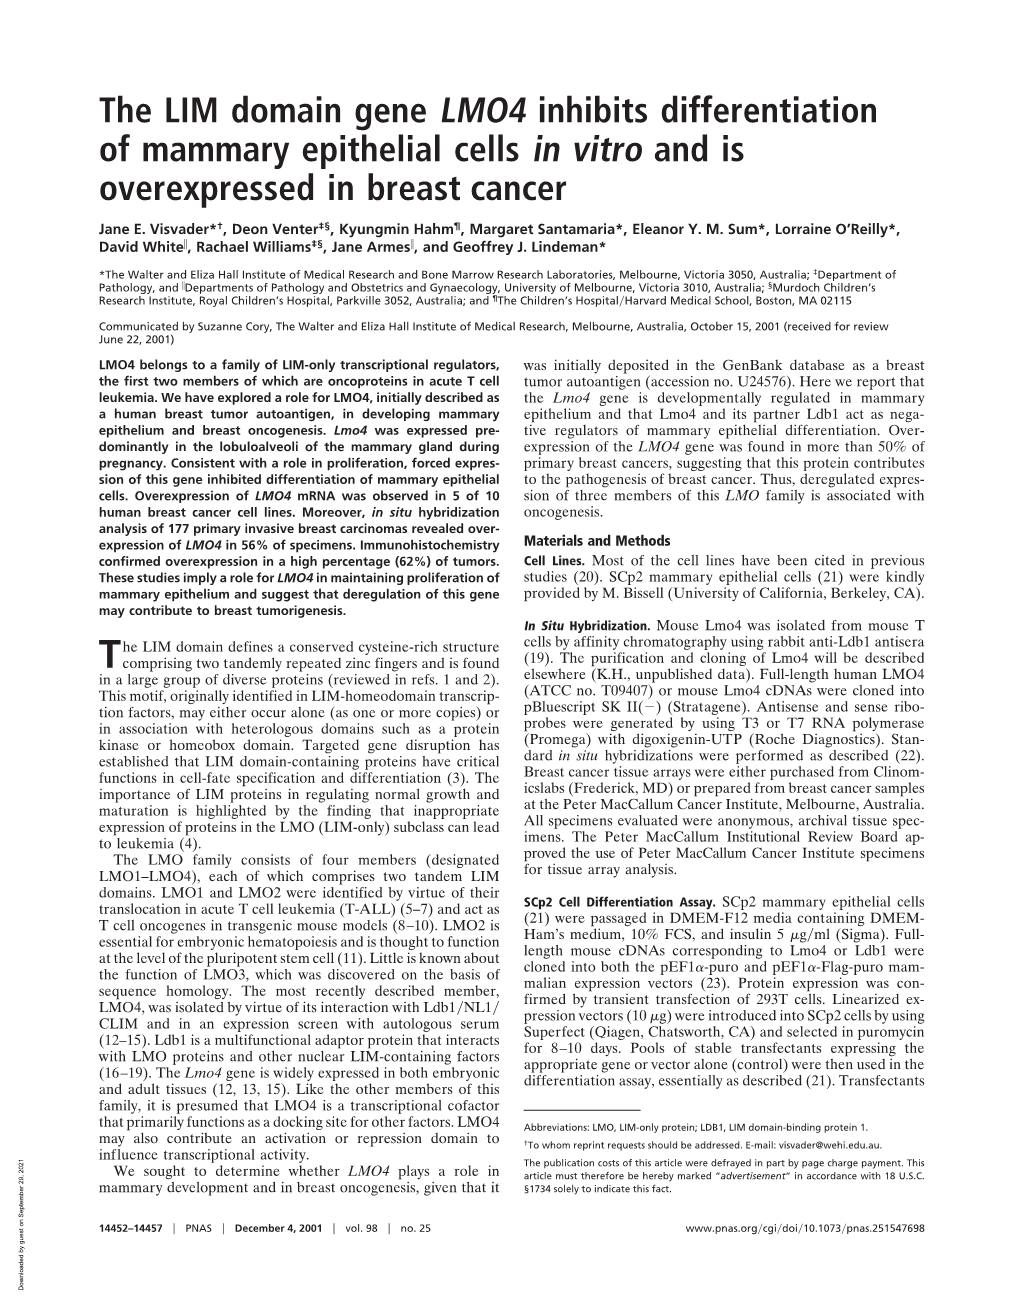 The LIM Domain Gene LMO4 Inhibits Differentiation of Mammary Epithelial Cells in Vitro and Is Overexpressed in Breast Cancer